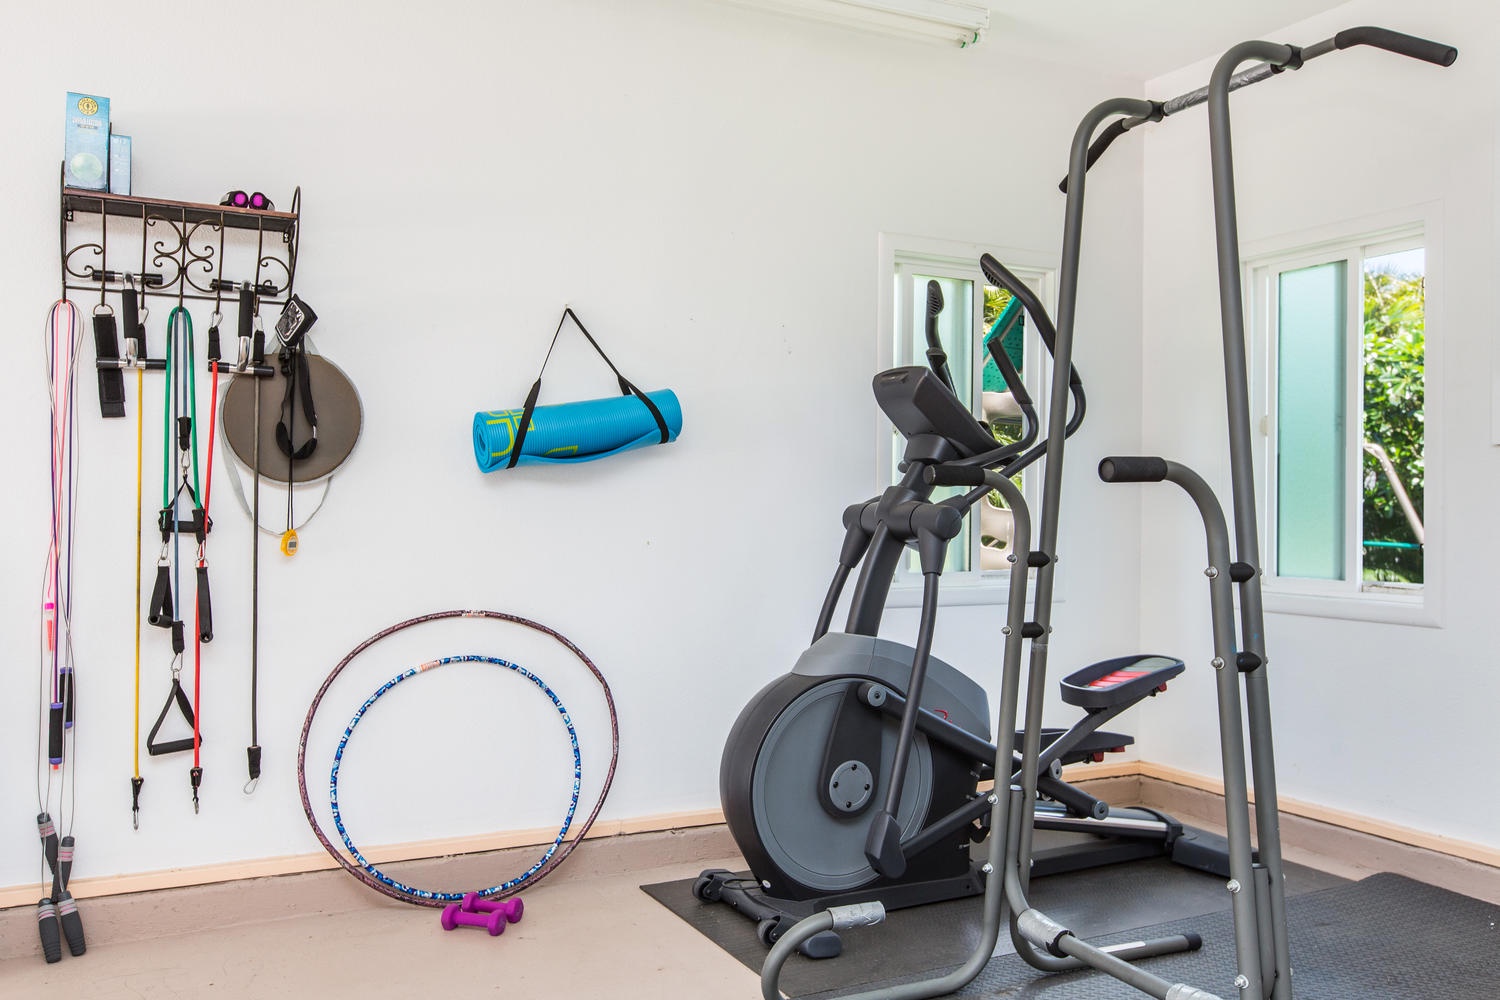 Honolulu Vacation Rentals, Makani Lani - Stay fit and active in our well-equipped gym.